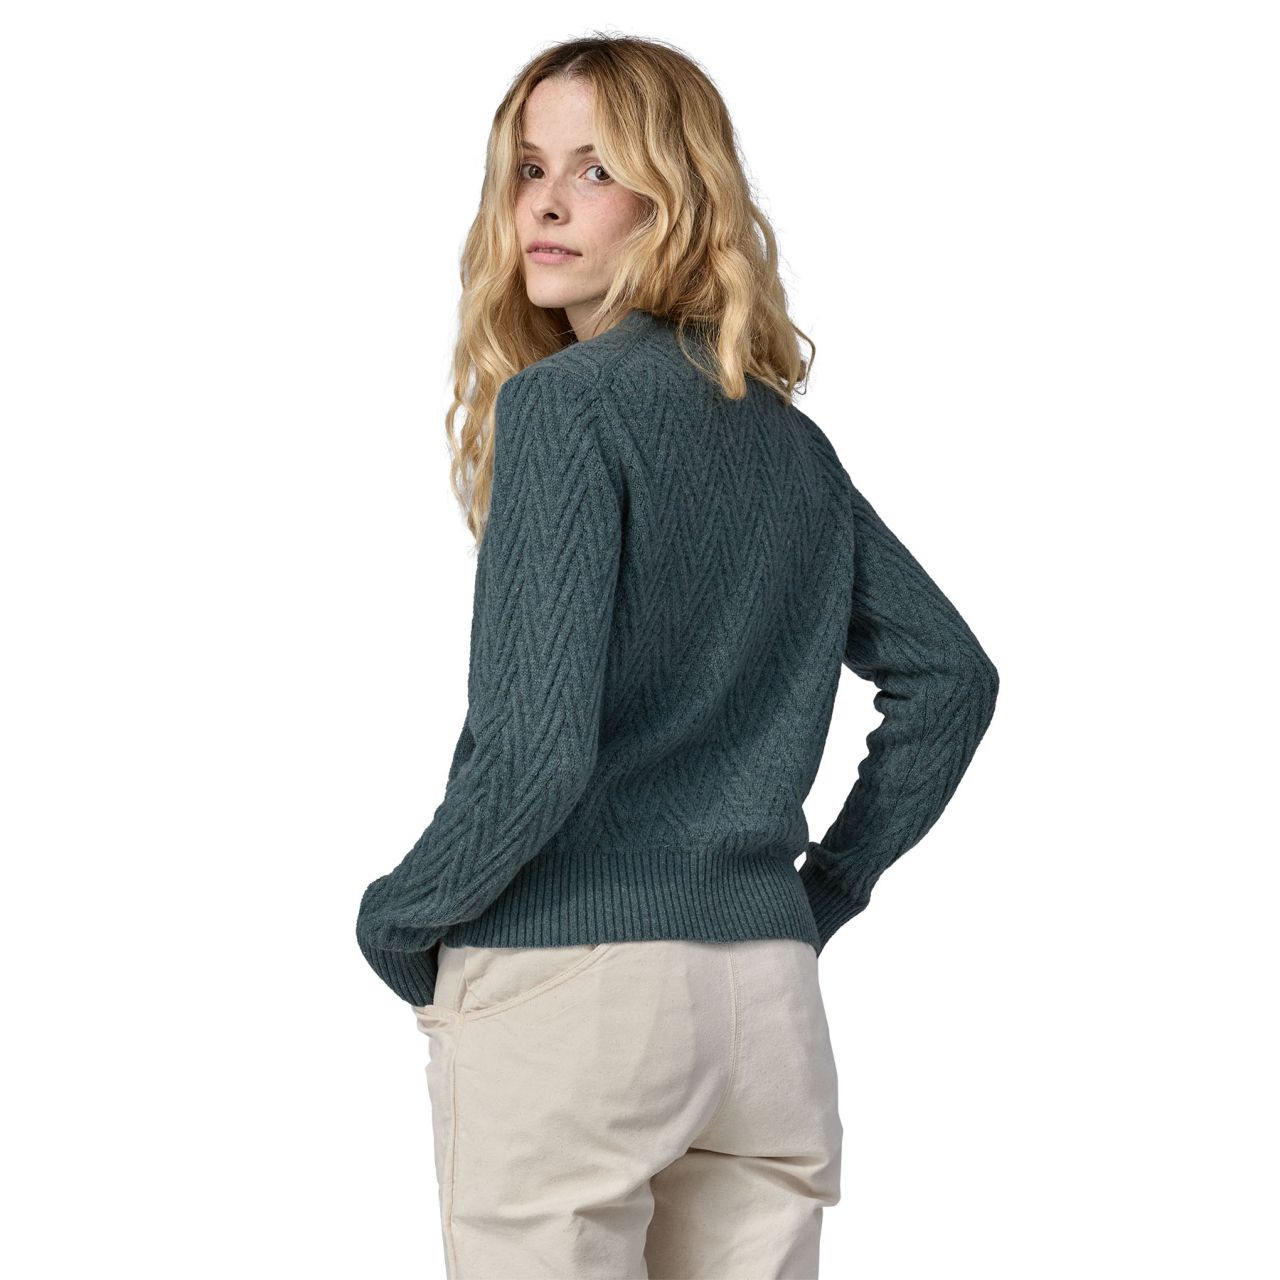 Patagonia Recycled Wool Crewneck Sweater - Women's Sea Song/Natural, M